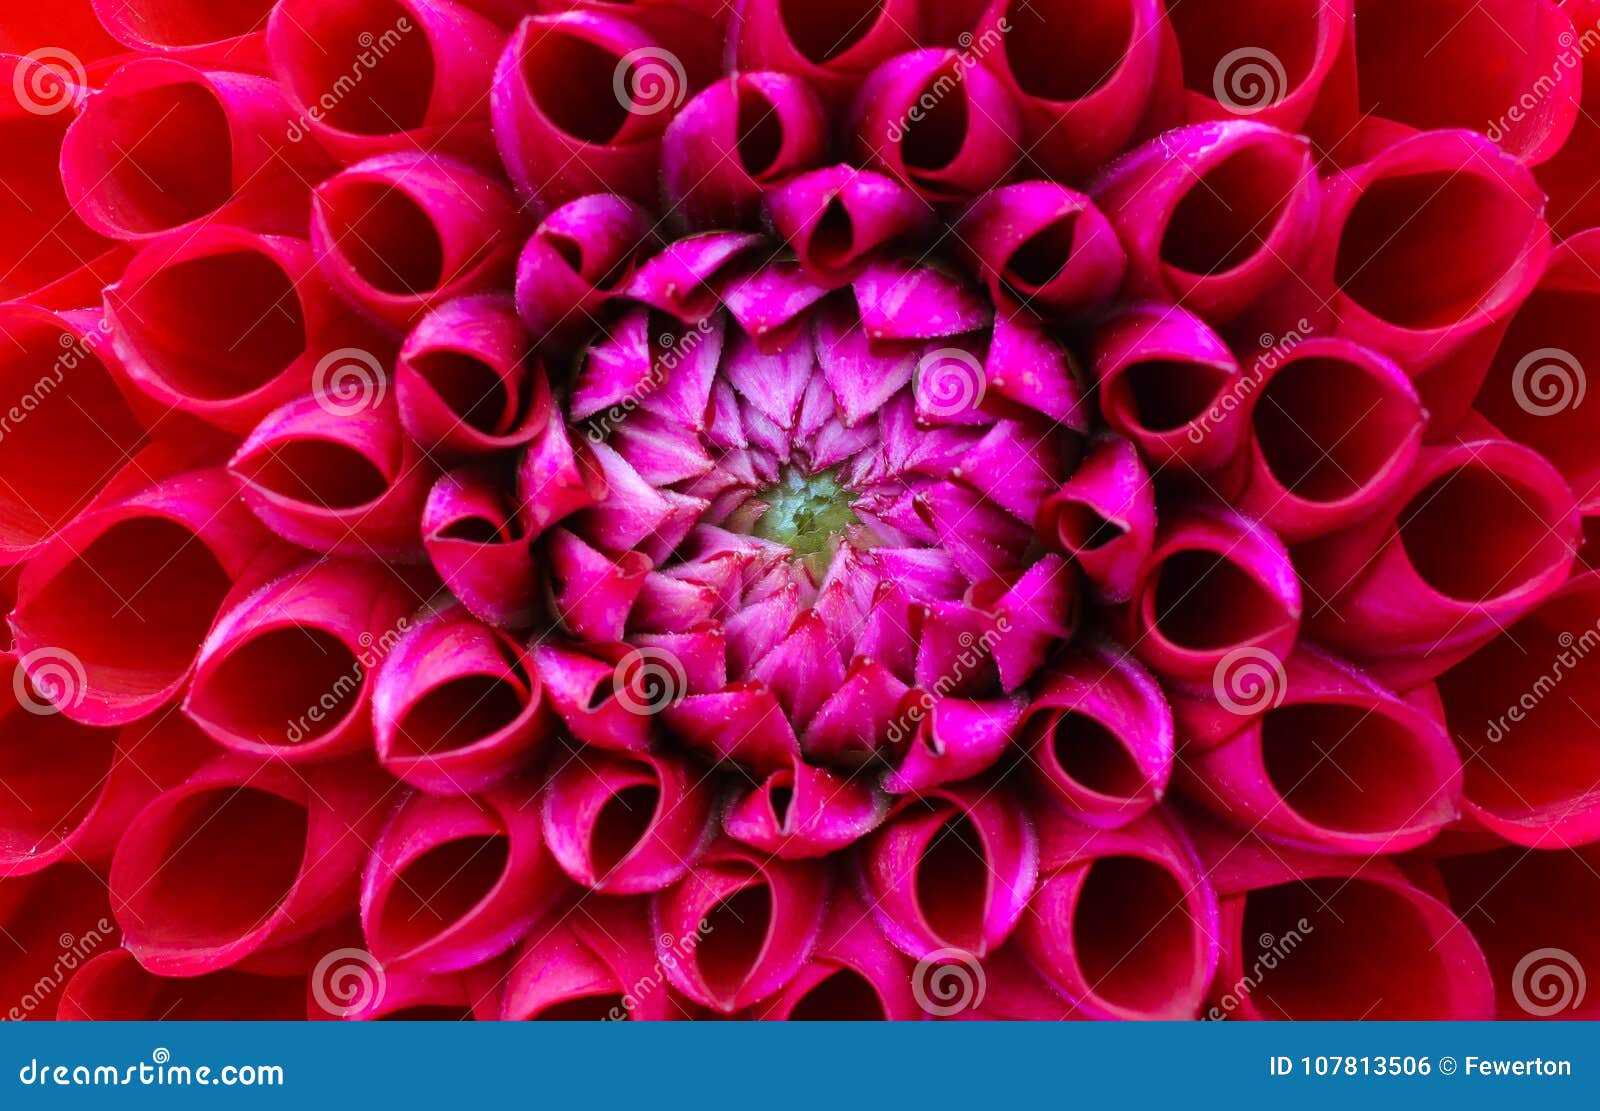 red and pink dahlia flower macro photo. picture in colour emphasizing the light pink and dark red colours.